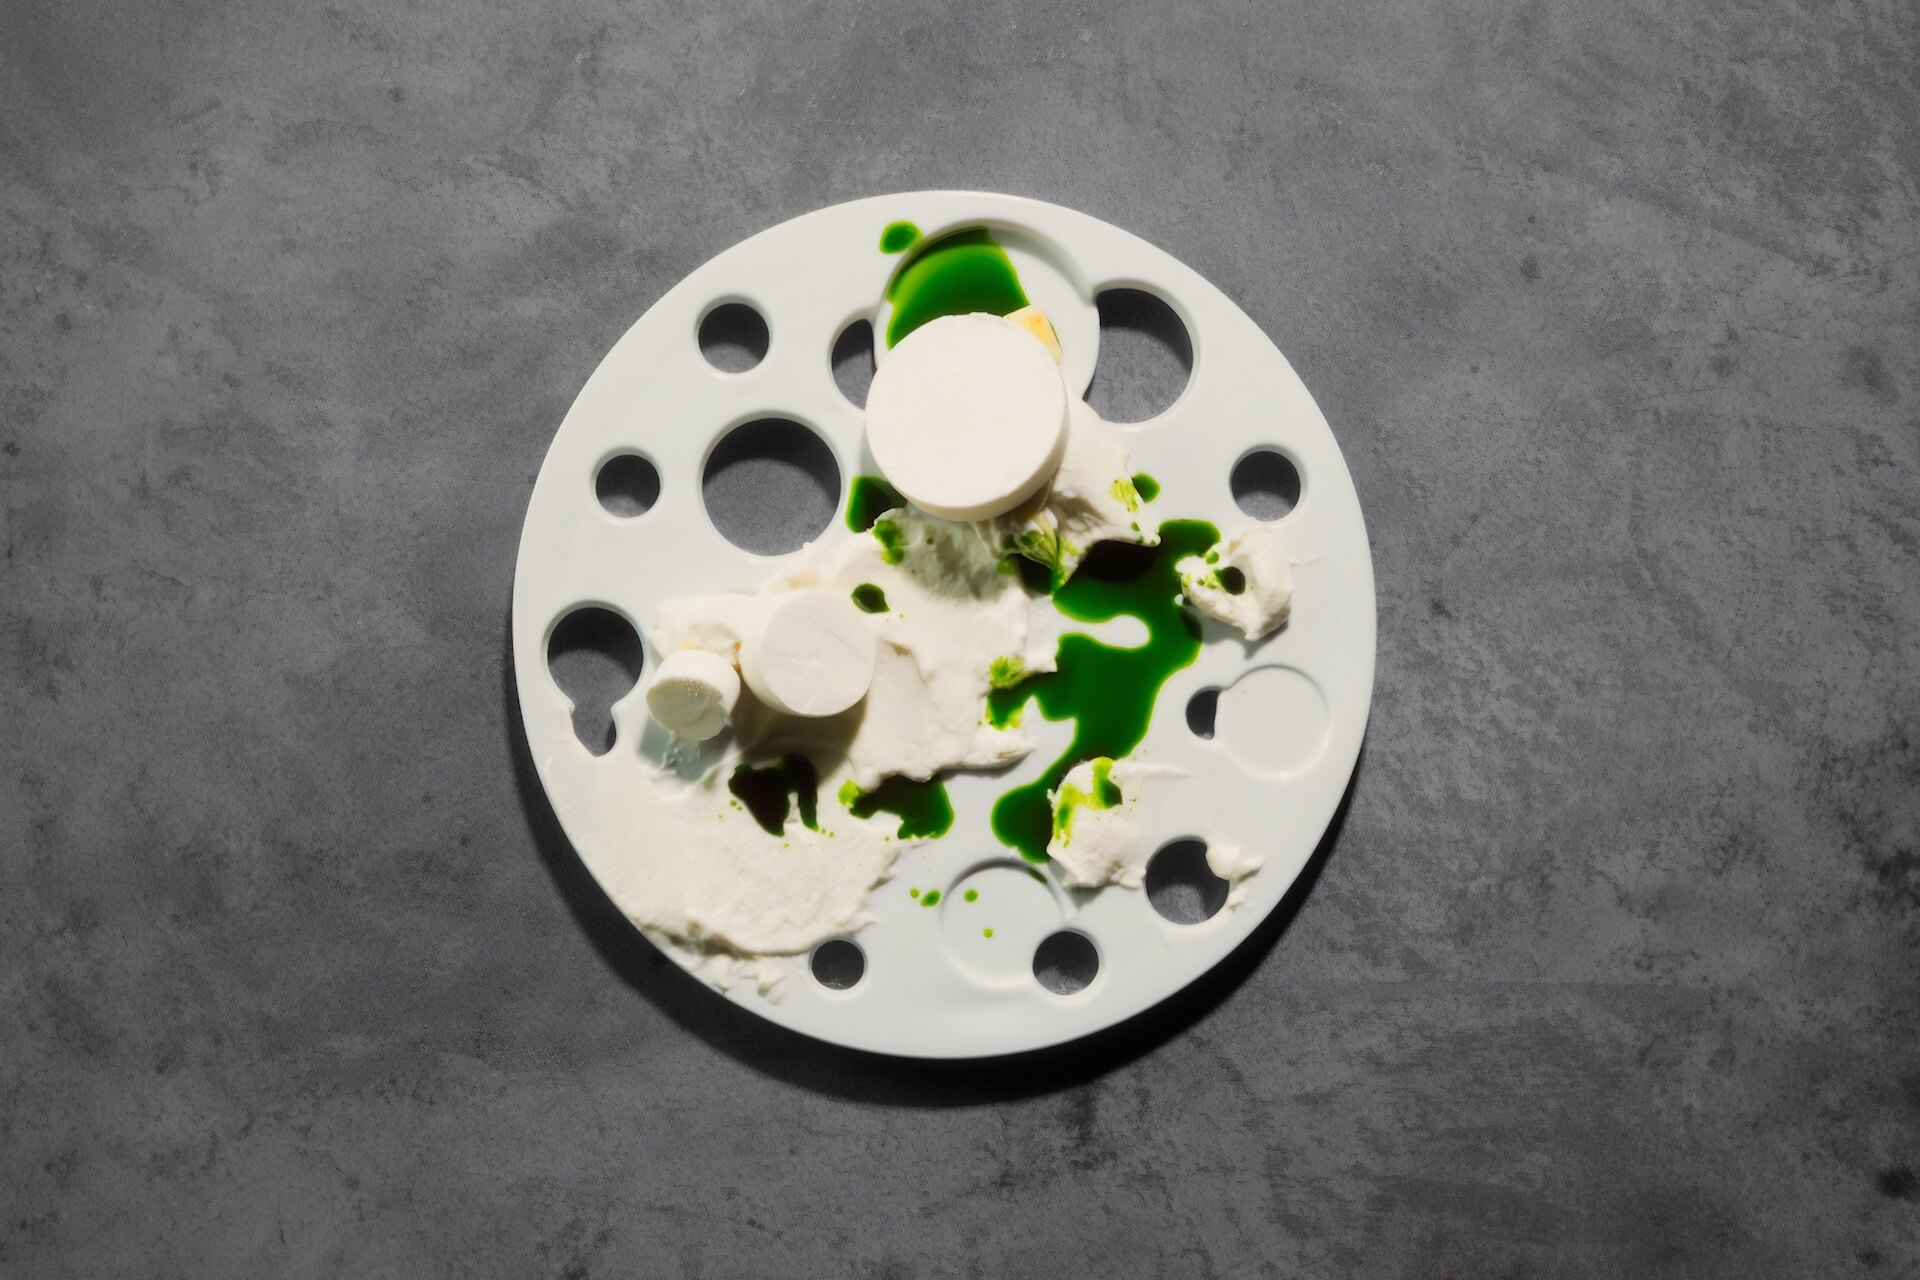 An artistic dish that is served on a unique plate